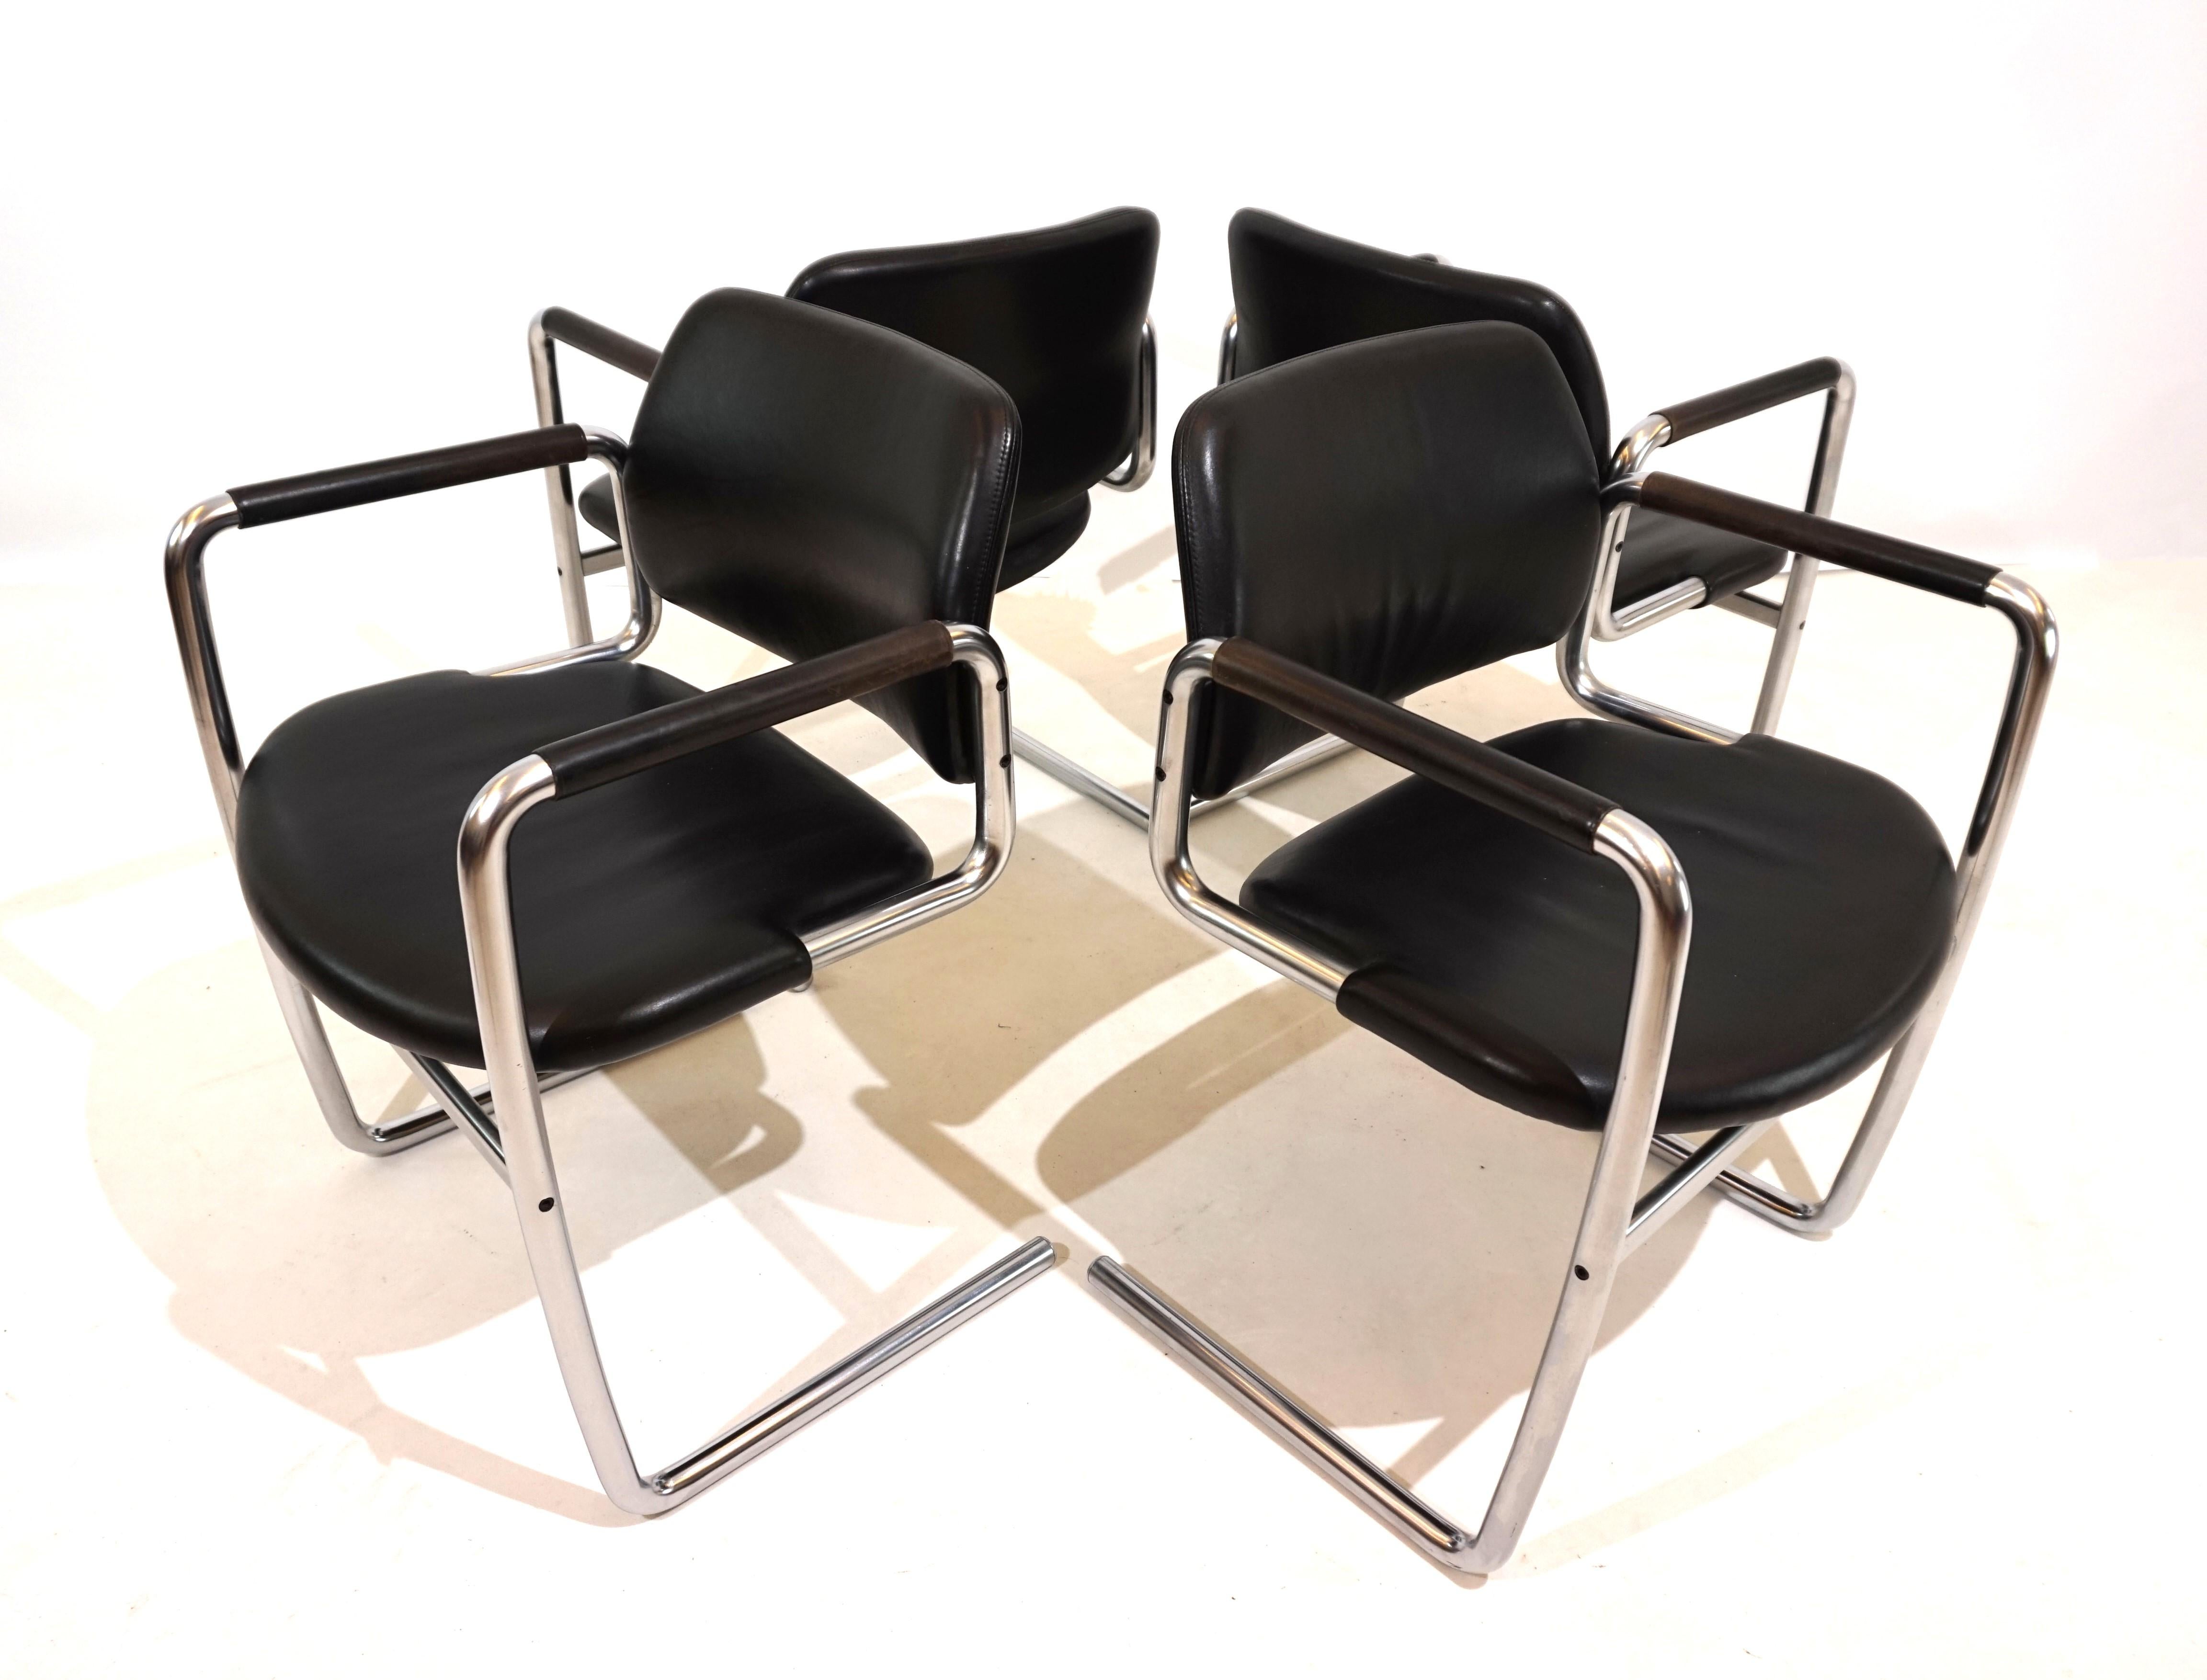 The set of 4 black leather cantilever chairs is designed in typical Kastholm style. The solid-looking curved metal frame supports the leather seat only at the front ends, giving the chair a certain lightness. The black leather seats and backrests of